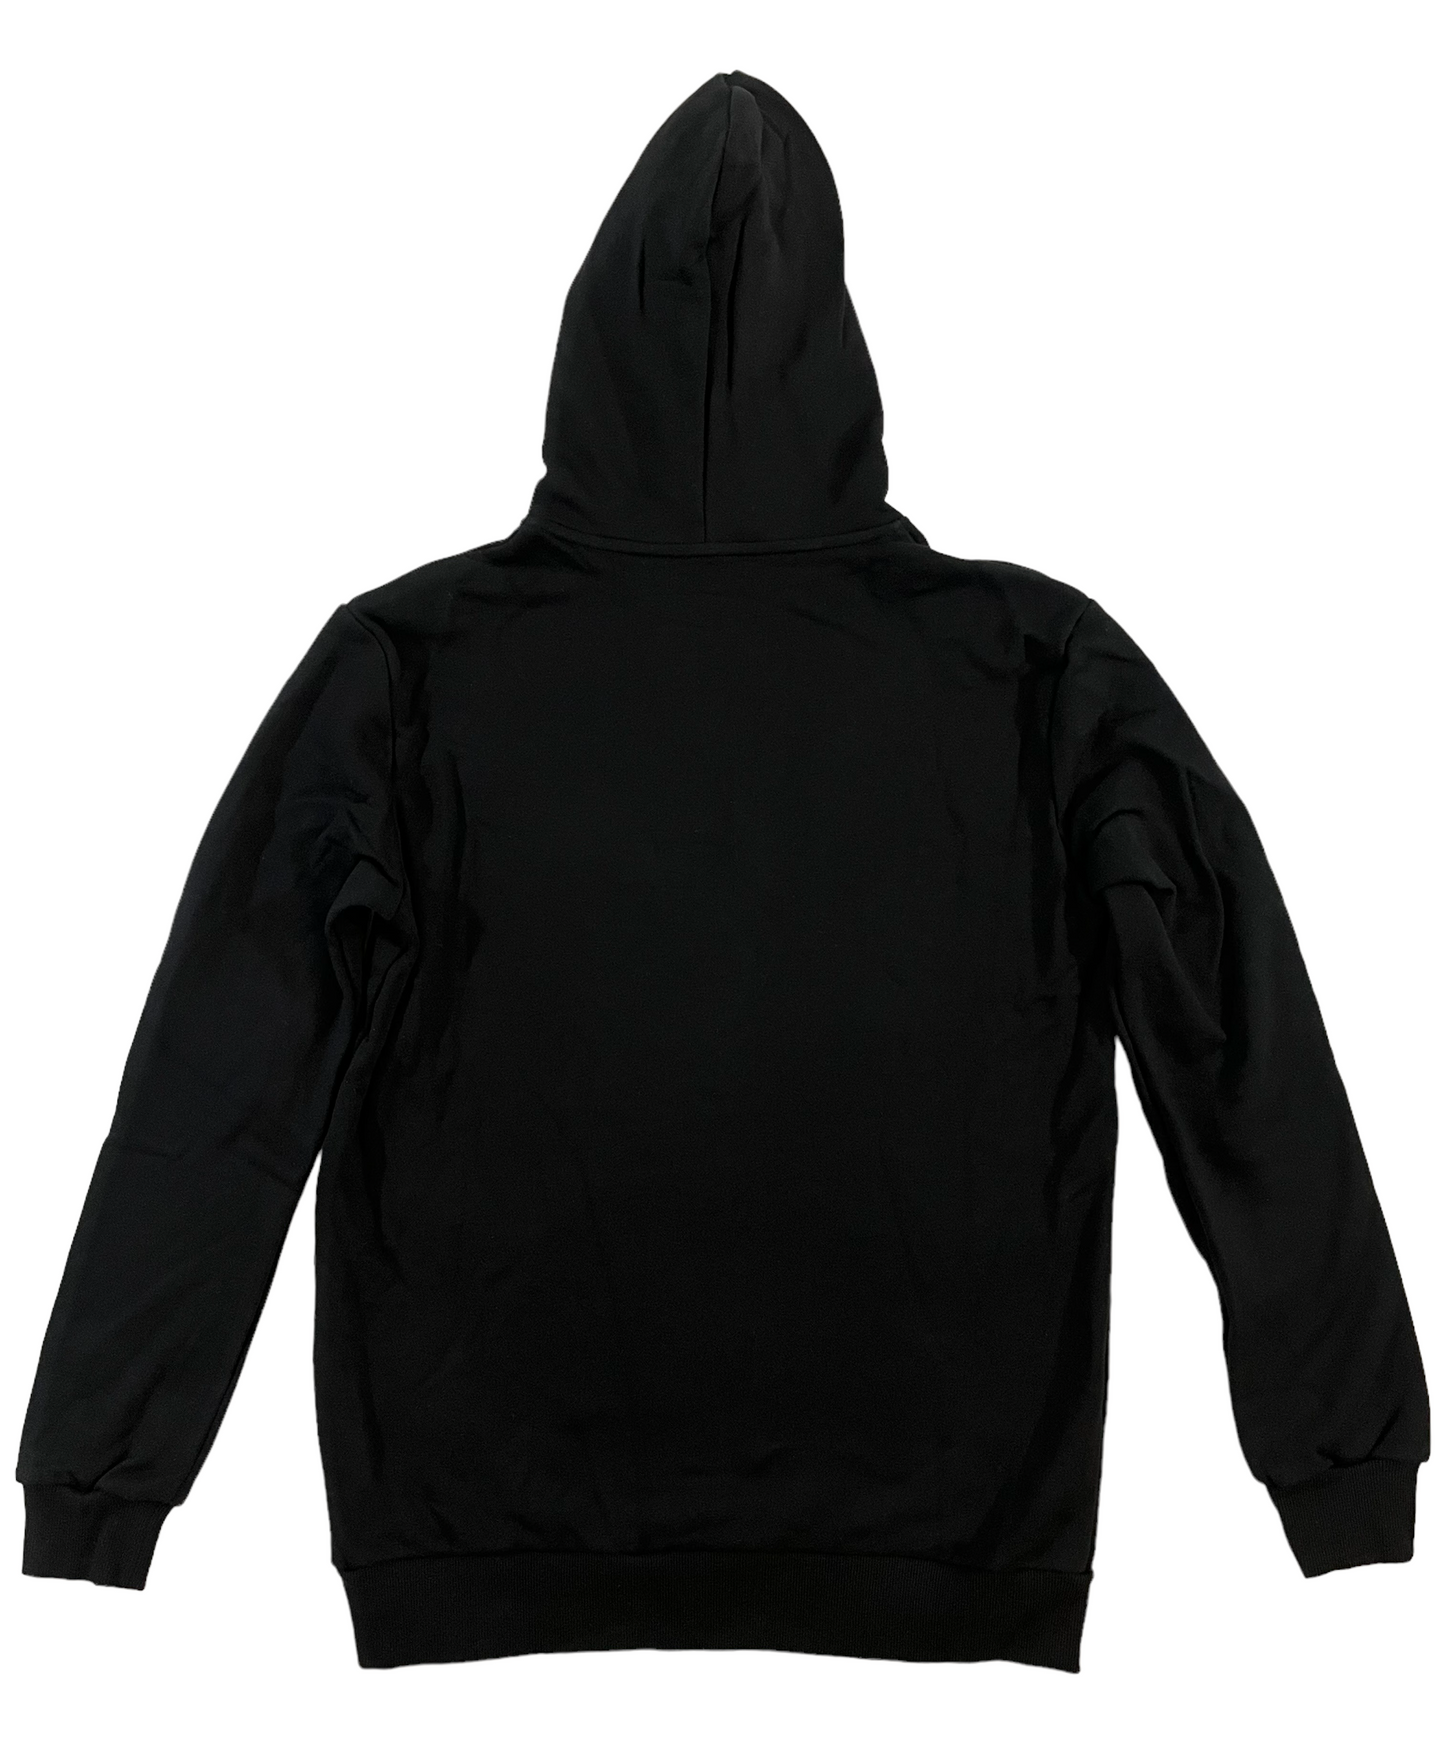 Hoodie - Black with Red Embroidery